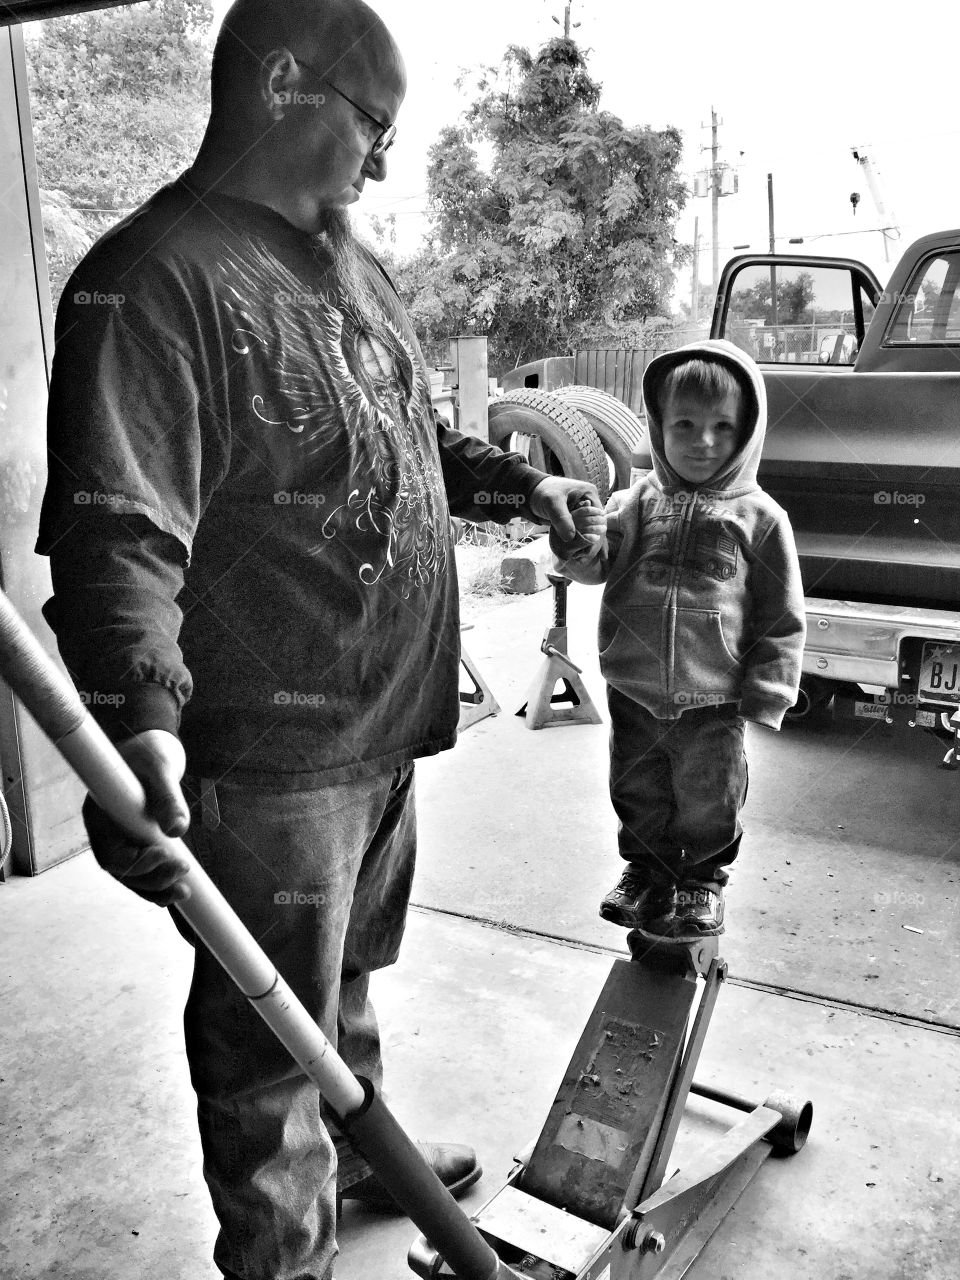 My husband jacking up our grandson on the jack. At the shop.They ere having fun